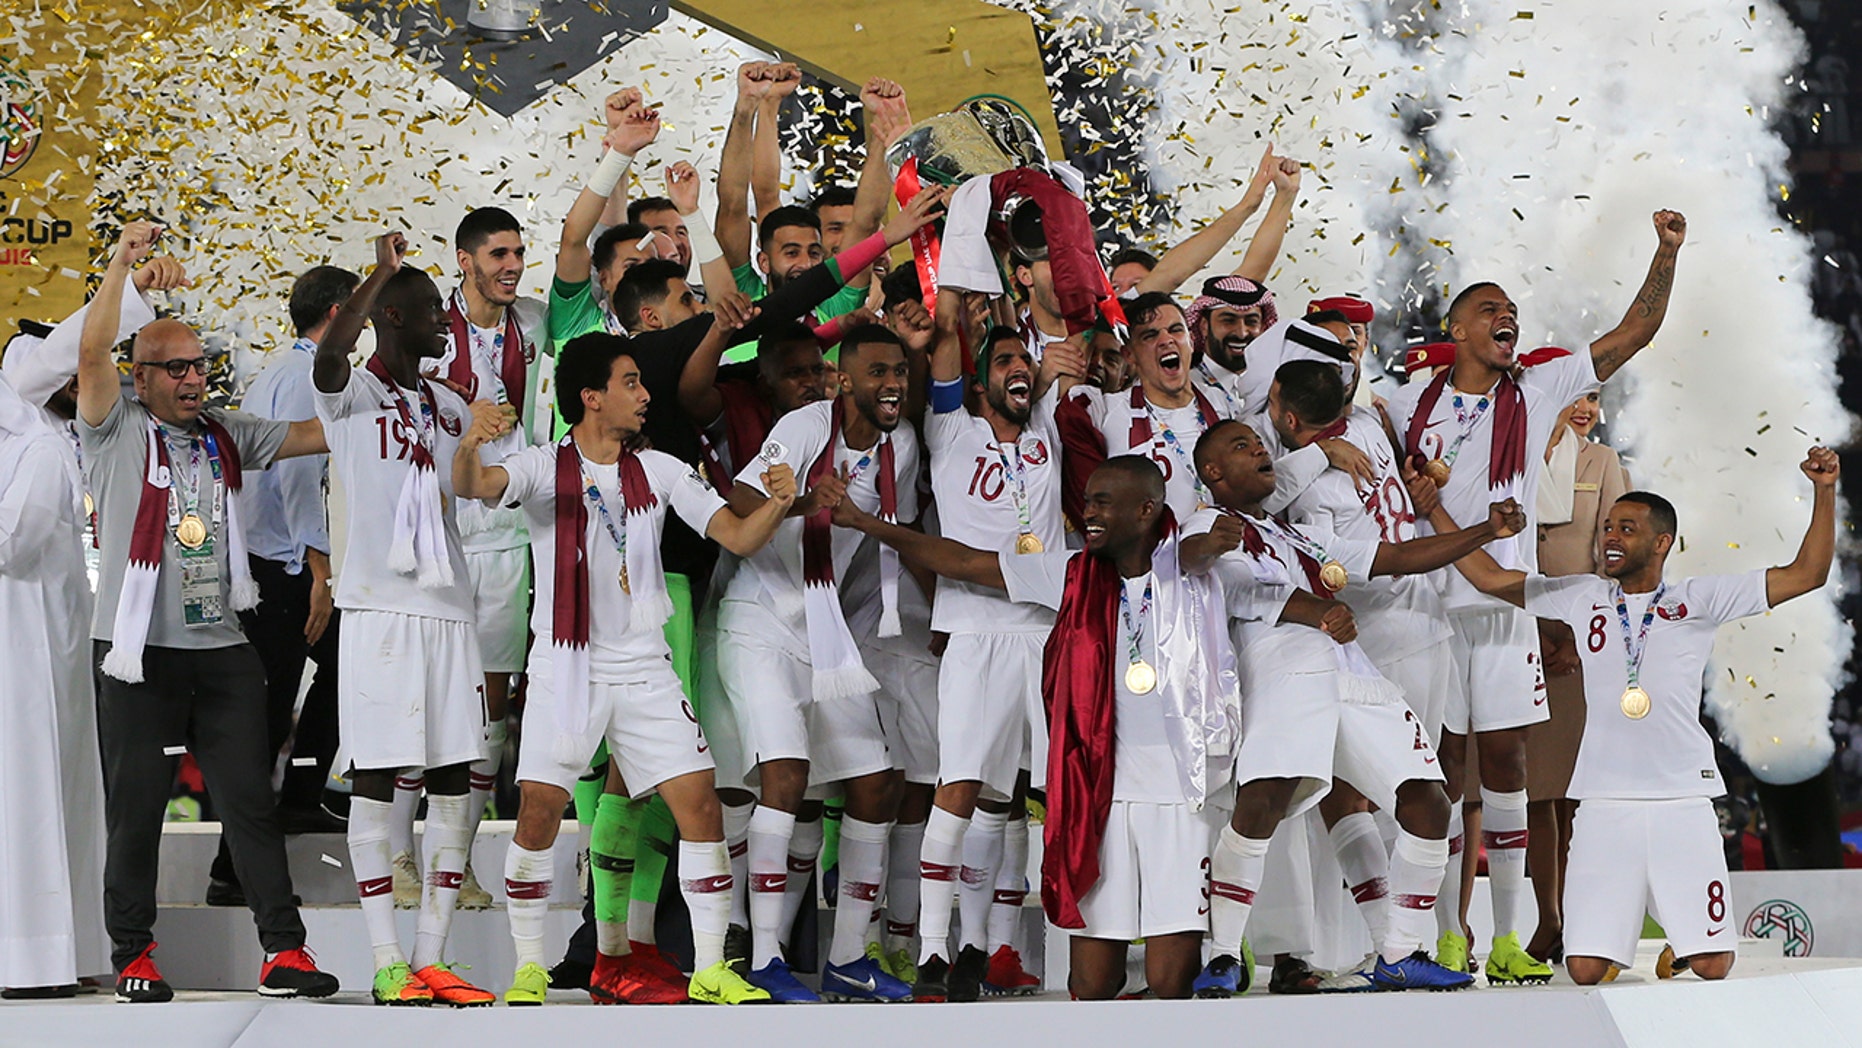 Qatar soccer team wins Asian Cup despite accusations from UAE of fielding ineligible players